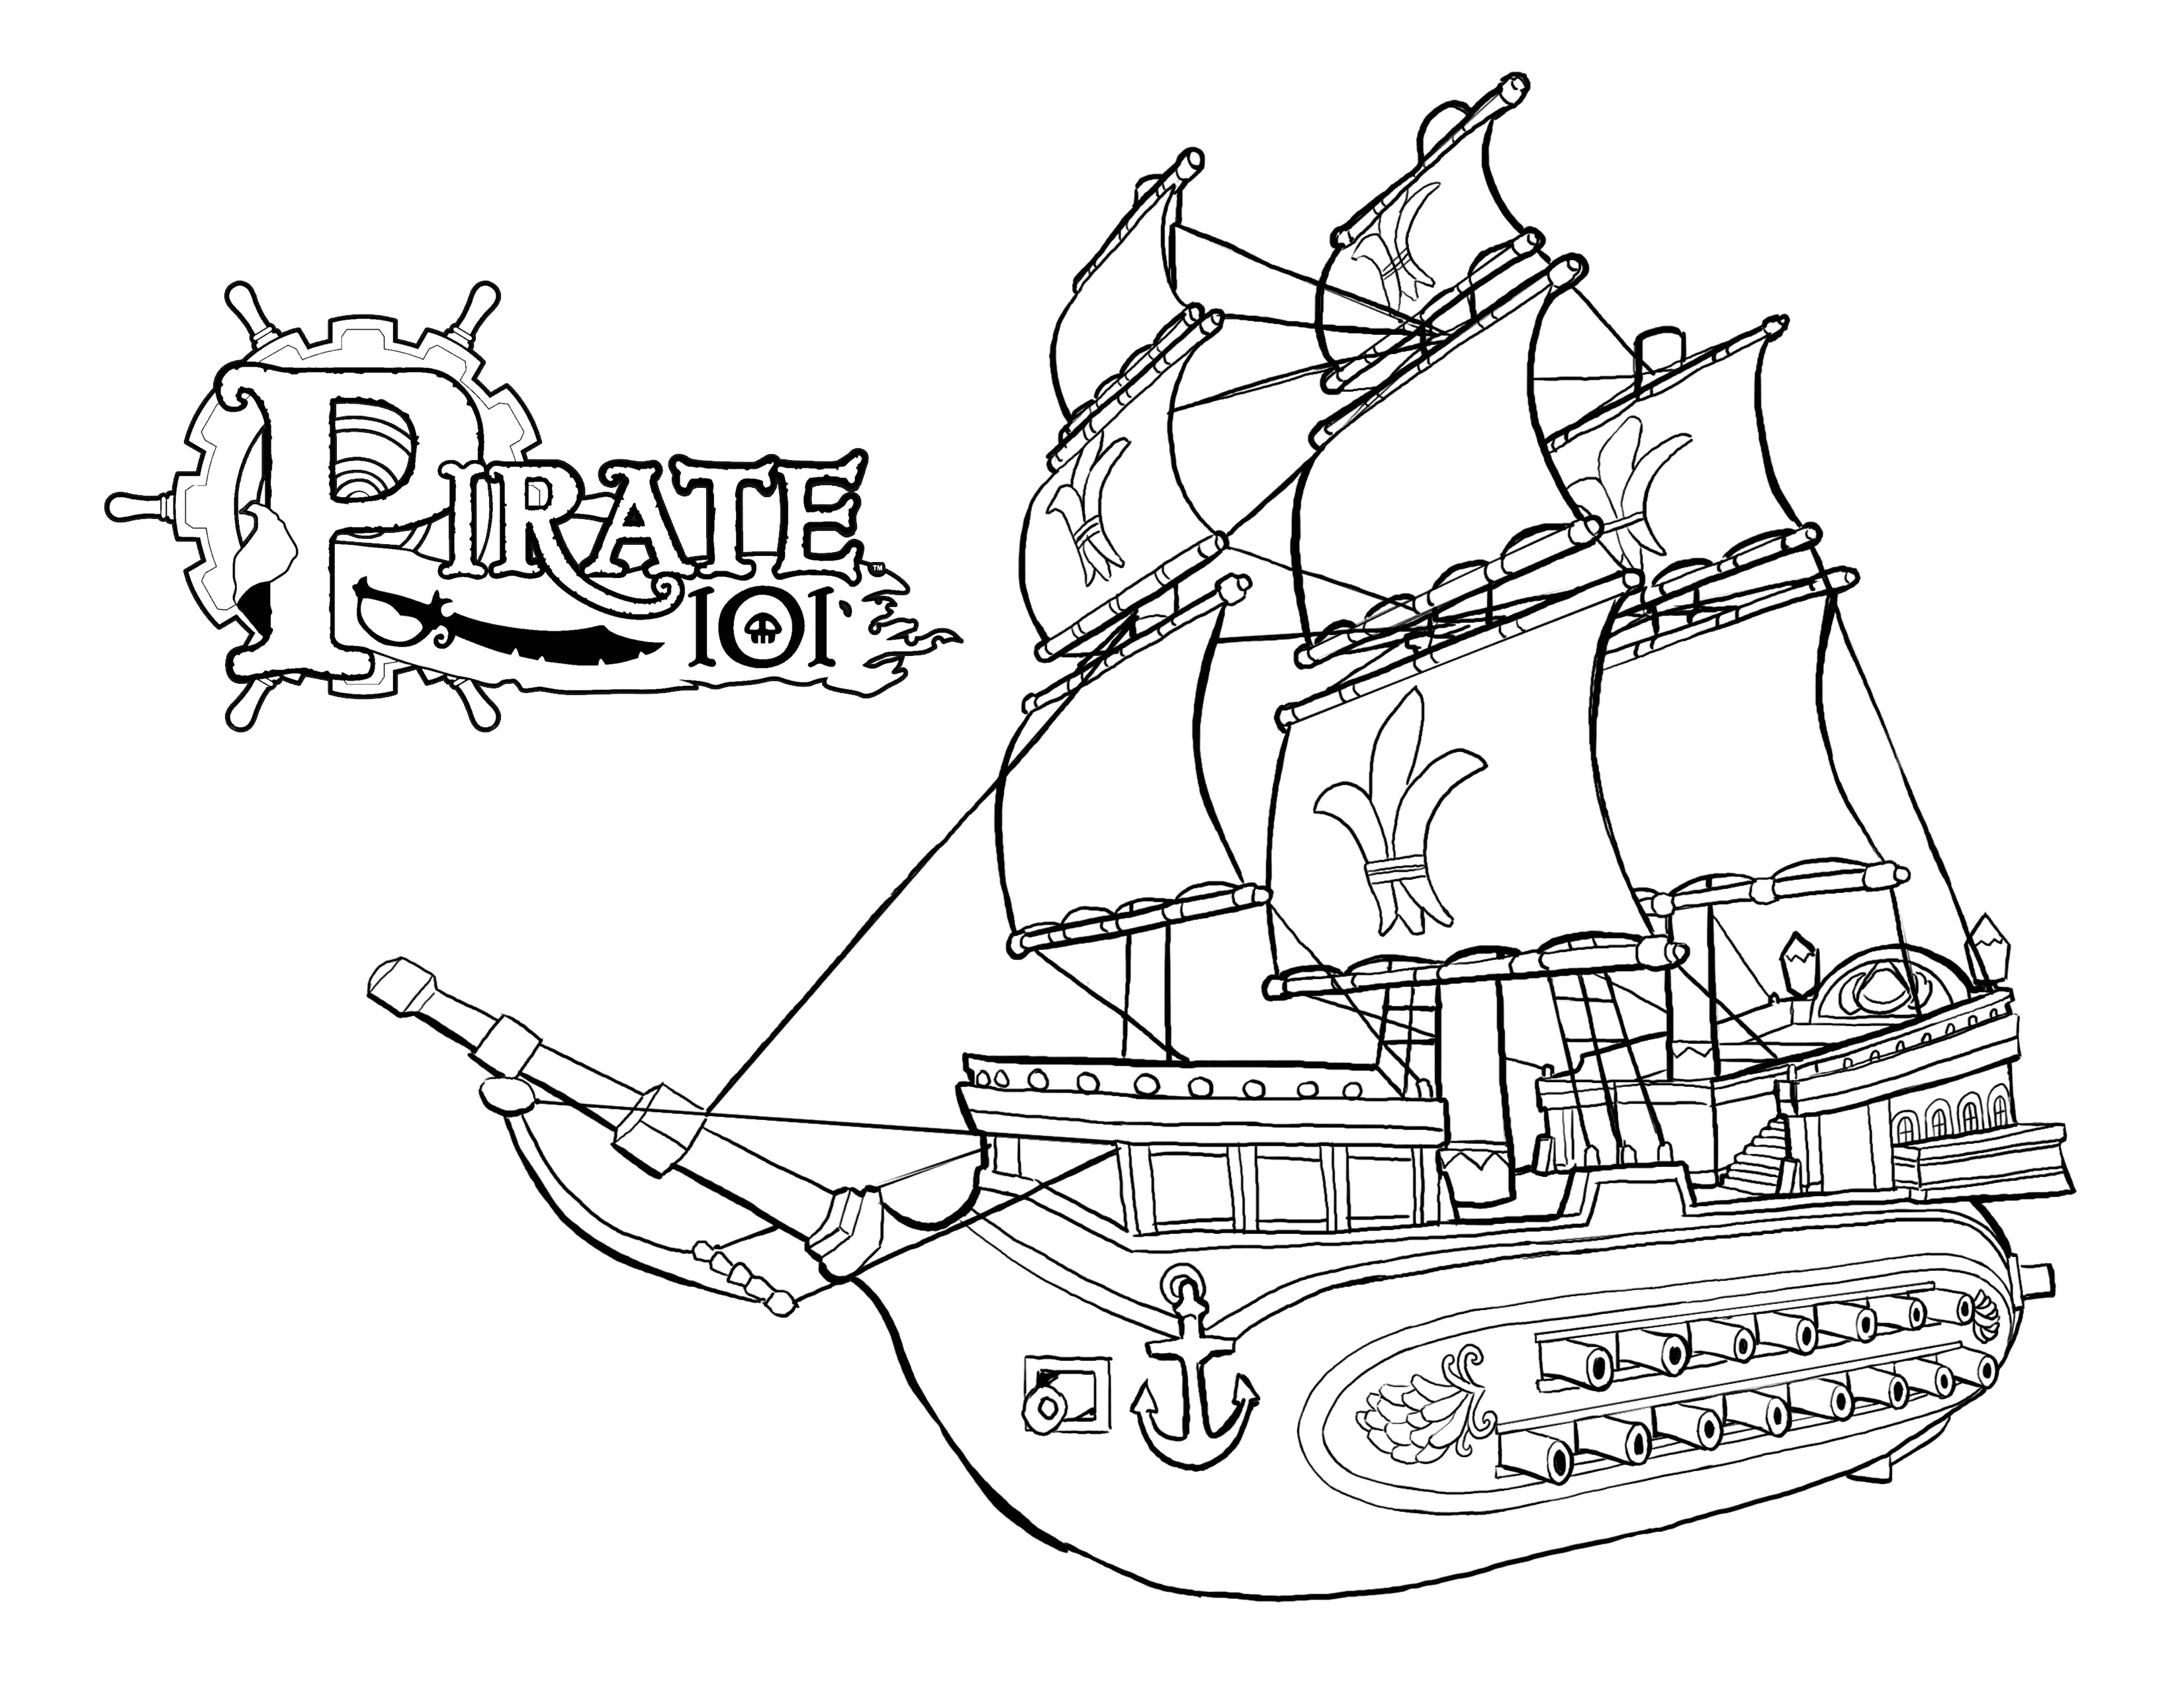 Ship Coloring Pages
 Sunken Pirate Ship Coloring Pages Coloring Pages